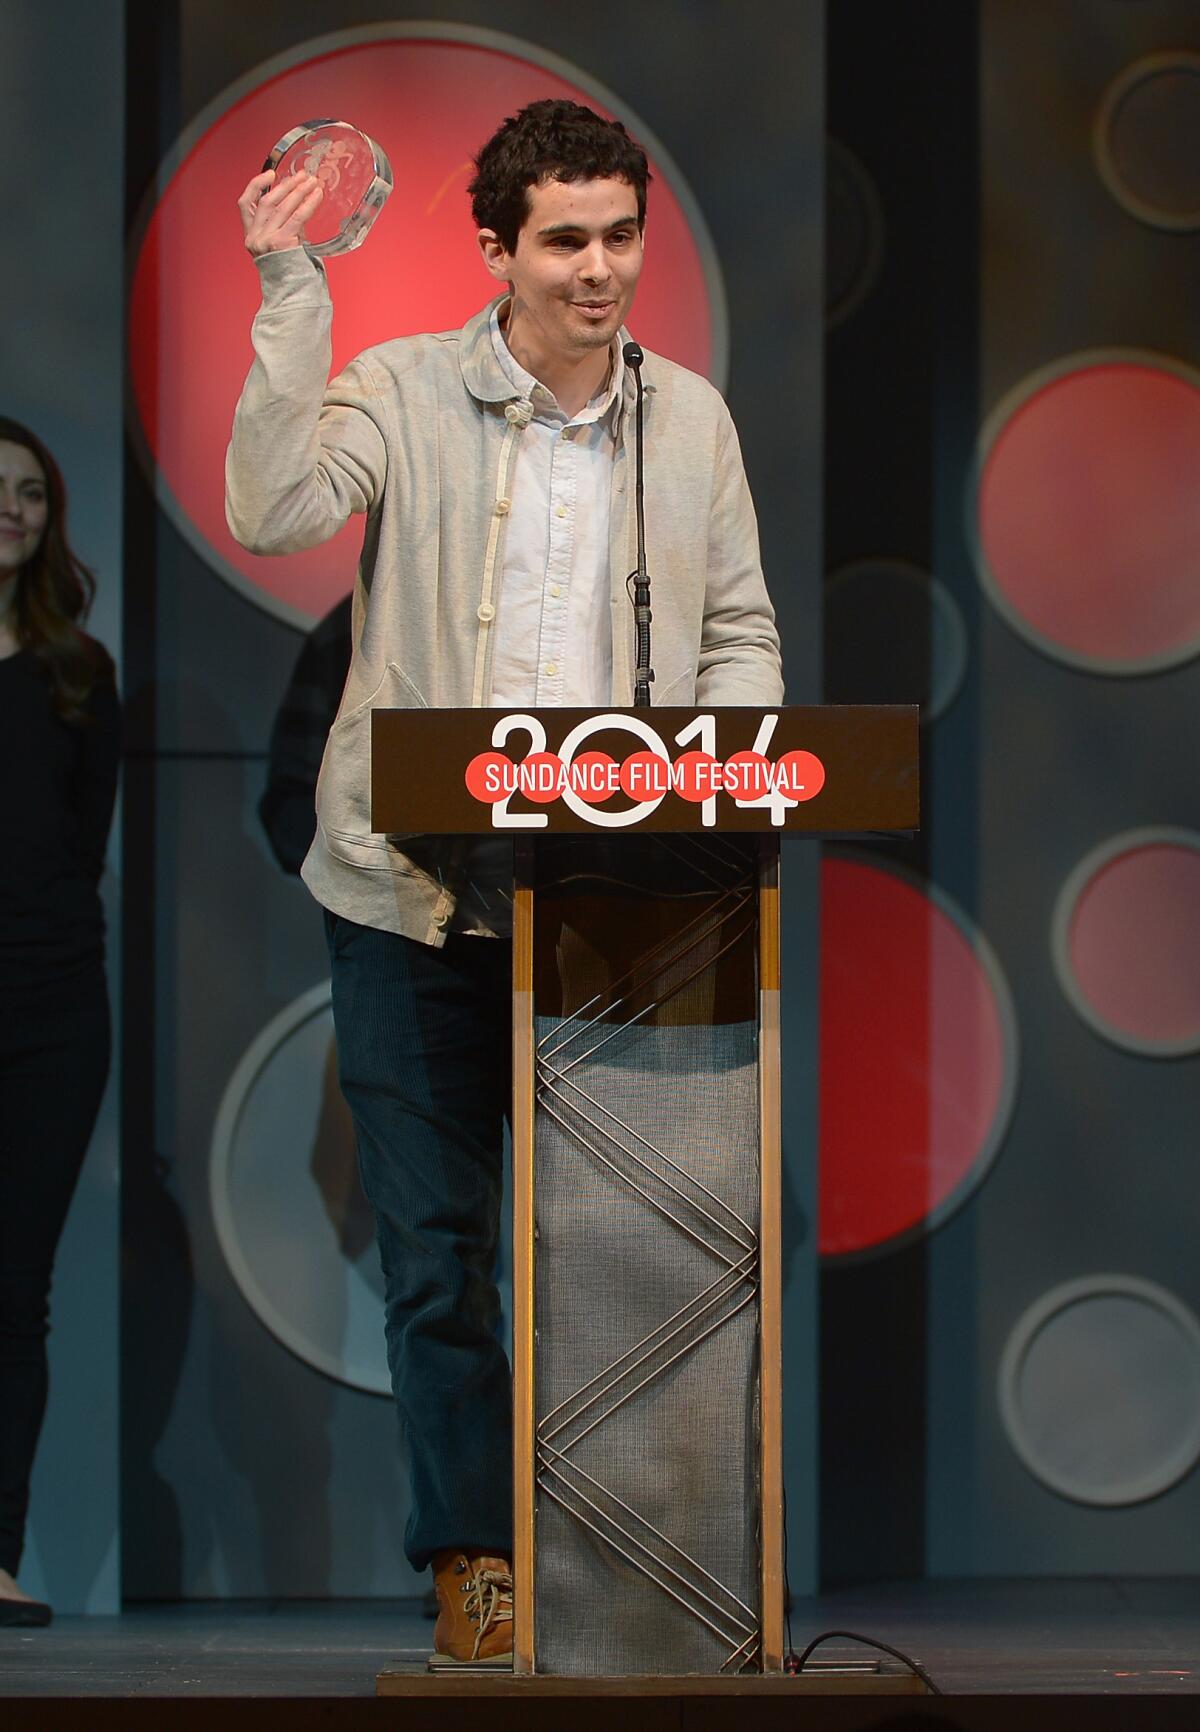 PARK CITY, UT - JANUARY 25: Director Damien Chazelle accepts the Audience Award: Dramatic presented by Acura for the film 'Whiplash' onstage at the Awards Night Ceremony at Basin Recreation Field House during the 2014 Sundance Film Festival on January 25, 2014 in Park City, Utah.